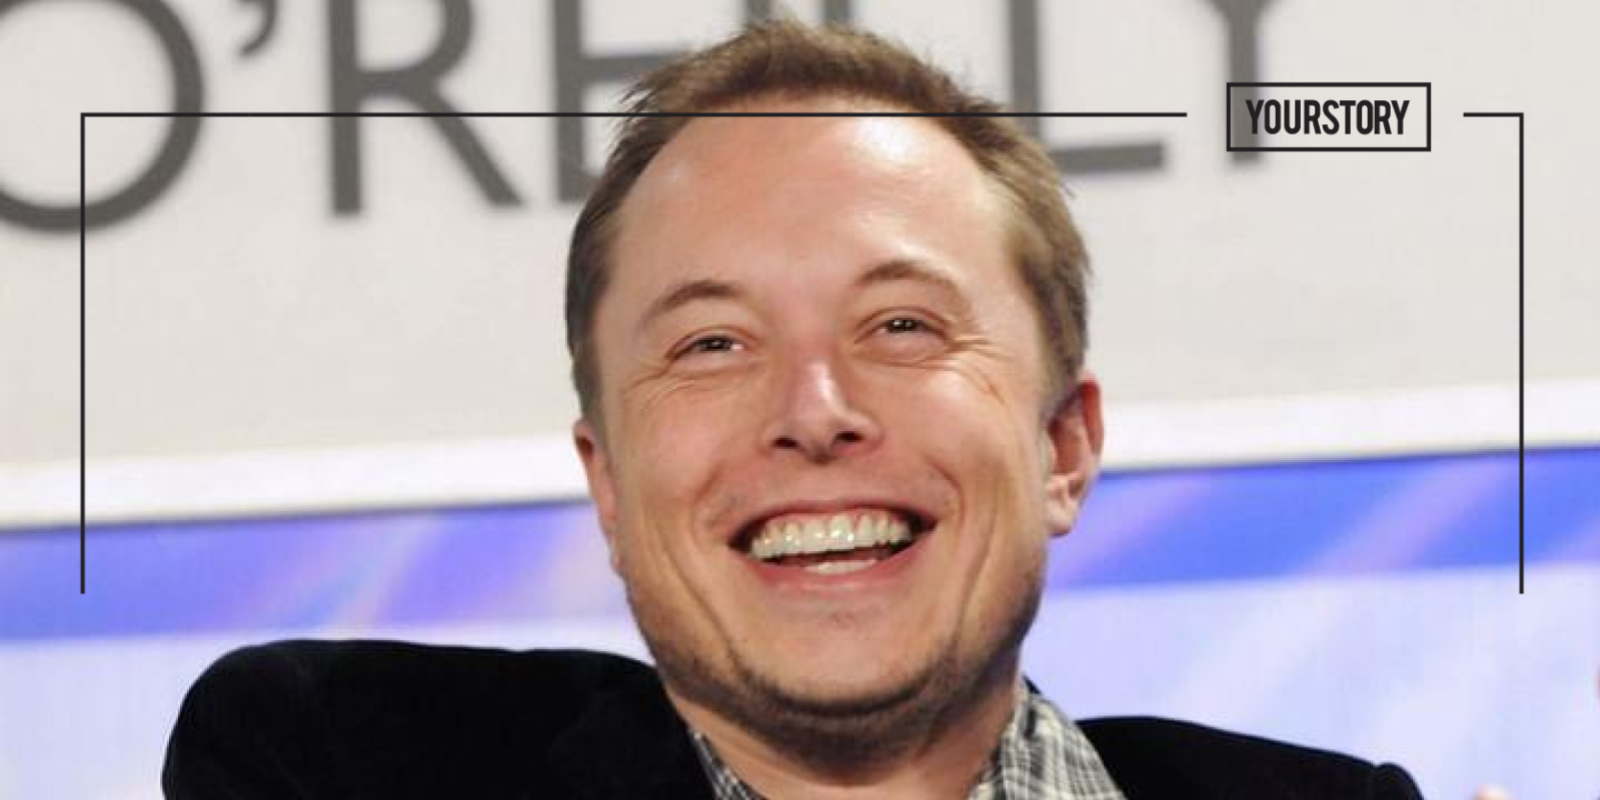 Elon Musk will not be joining Twitter board, CEO Parag Agrawal says